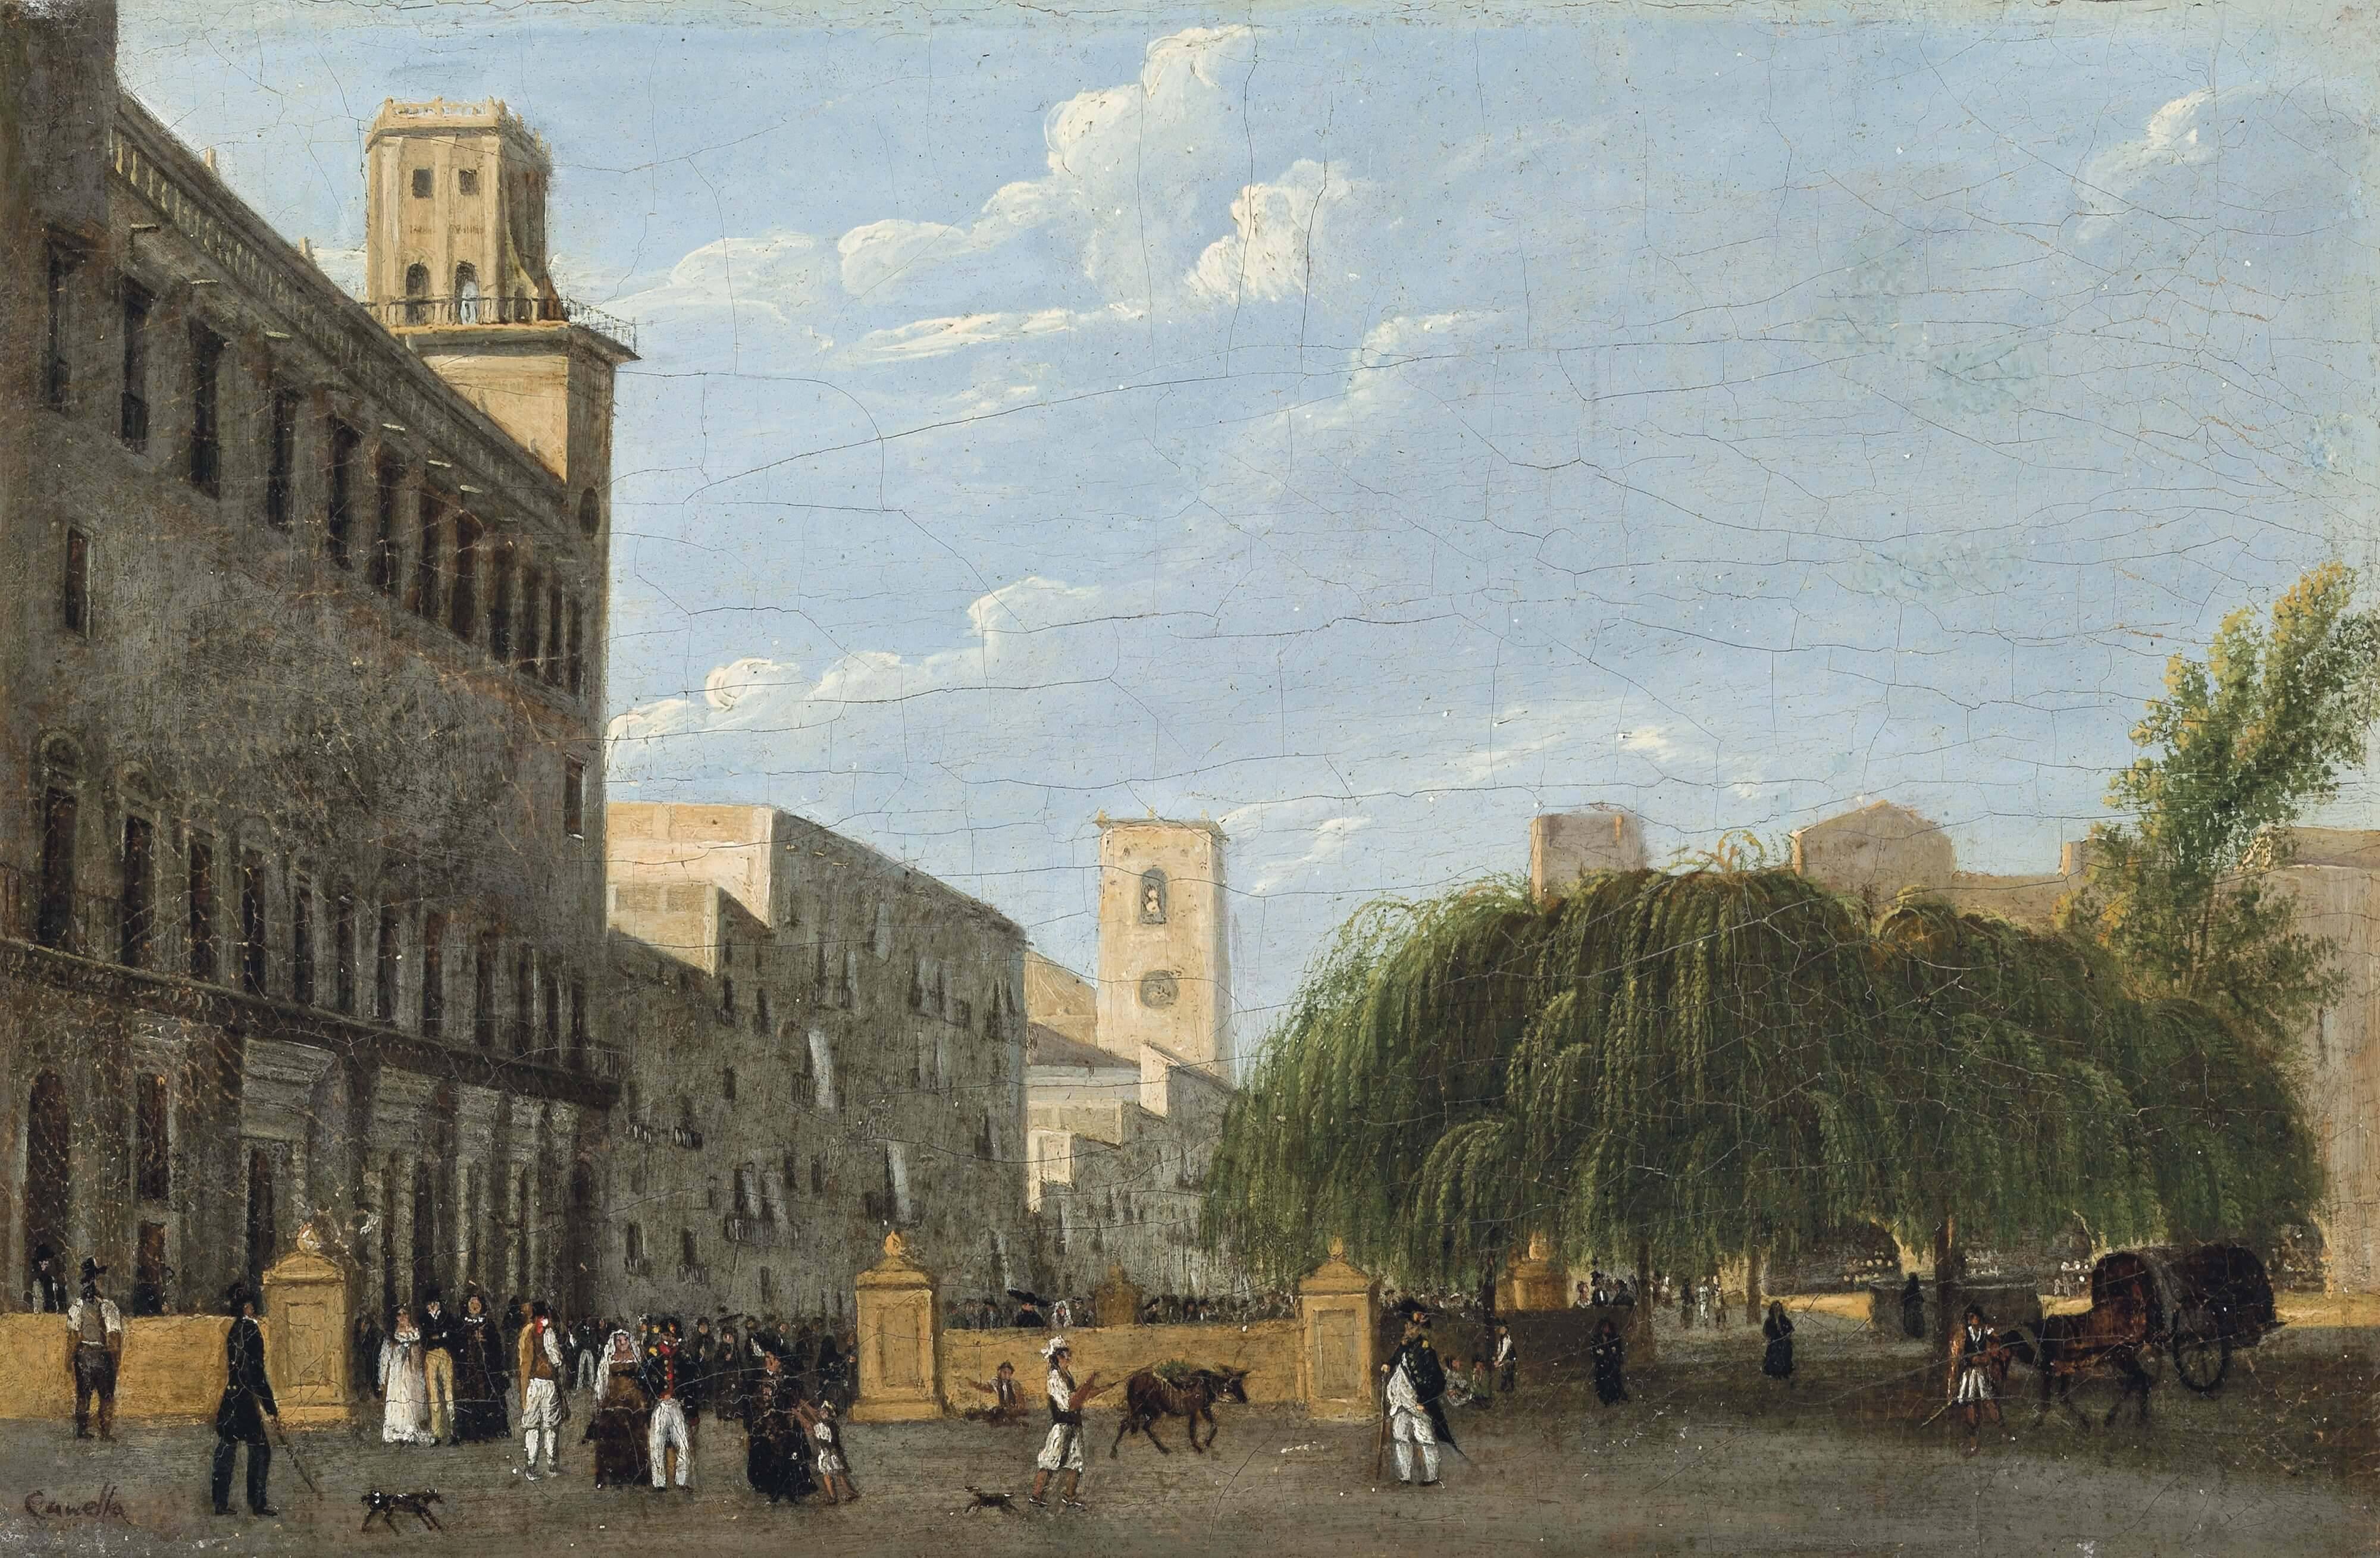 Giuseppe Canella Landscape Painting - Figures in an Italianate Square